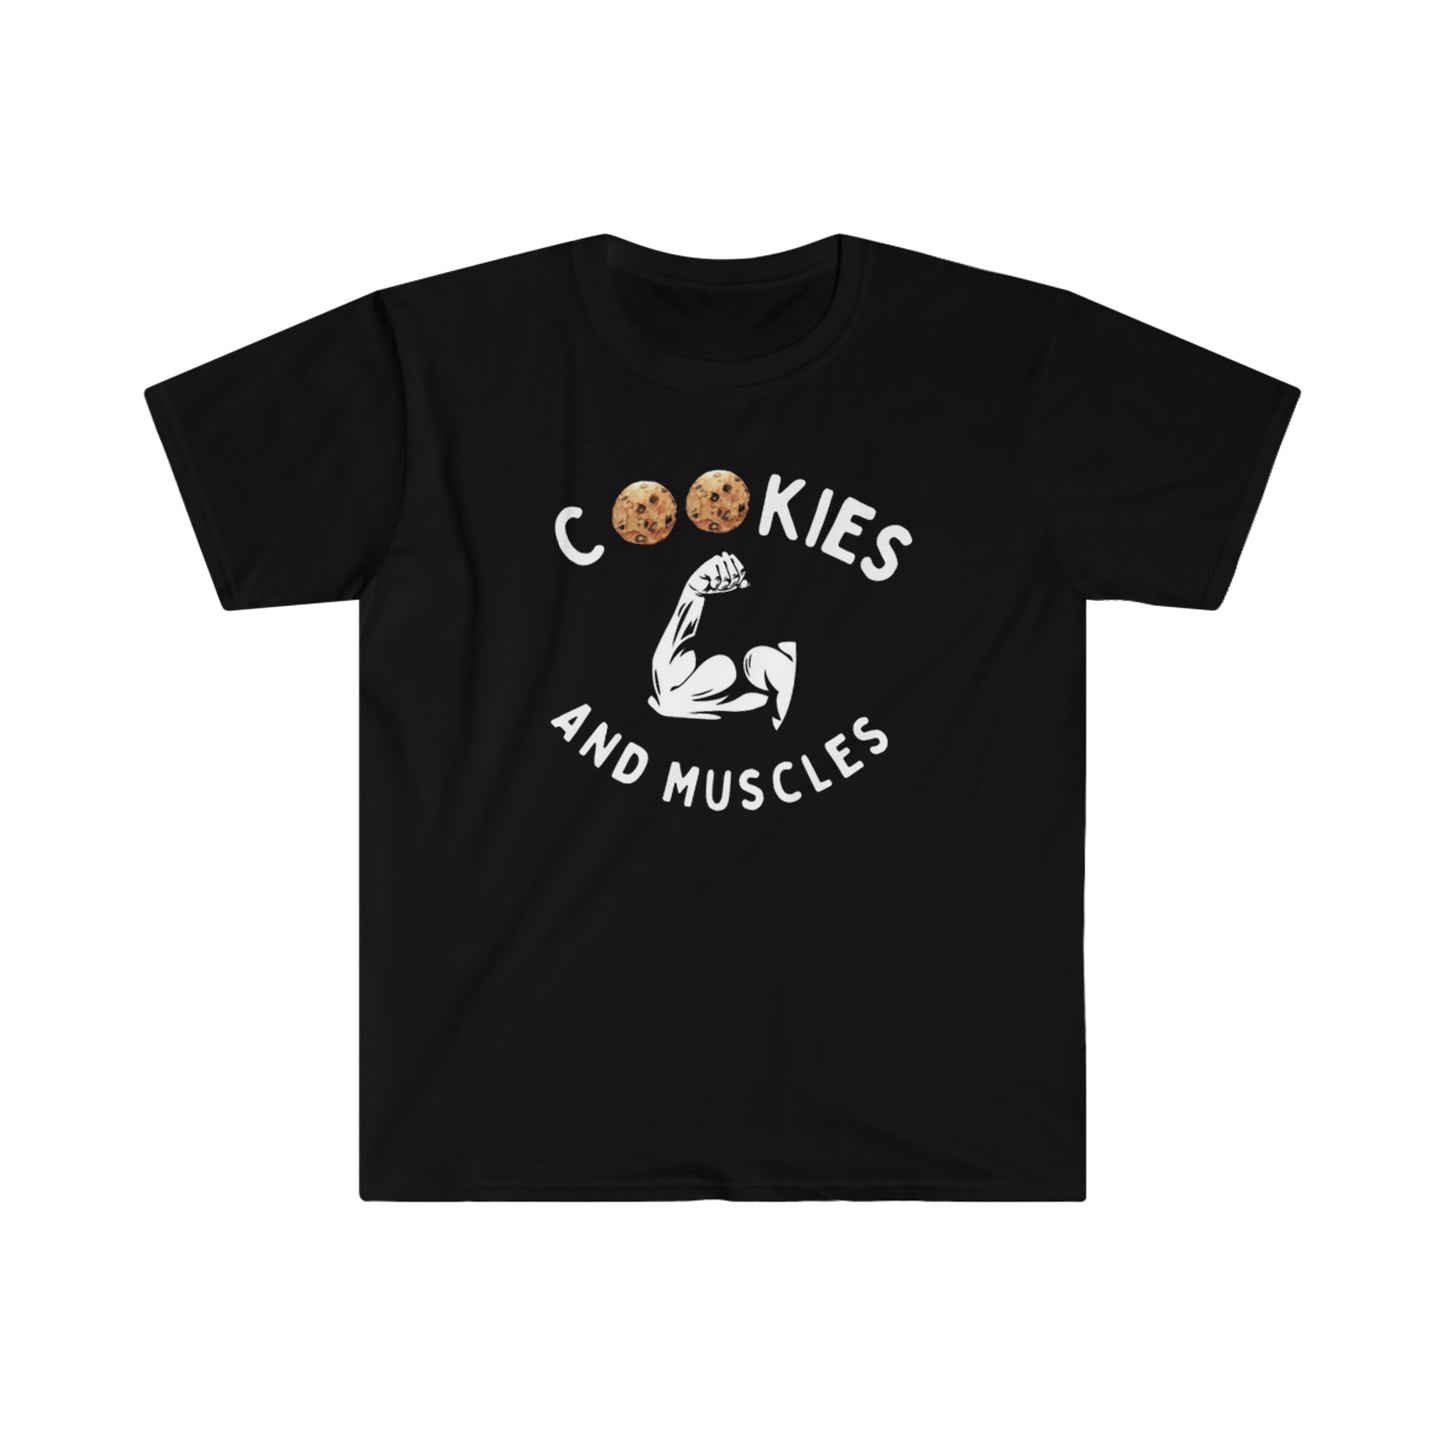 Cookies And Muscles Gym T-Shirt